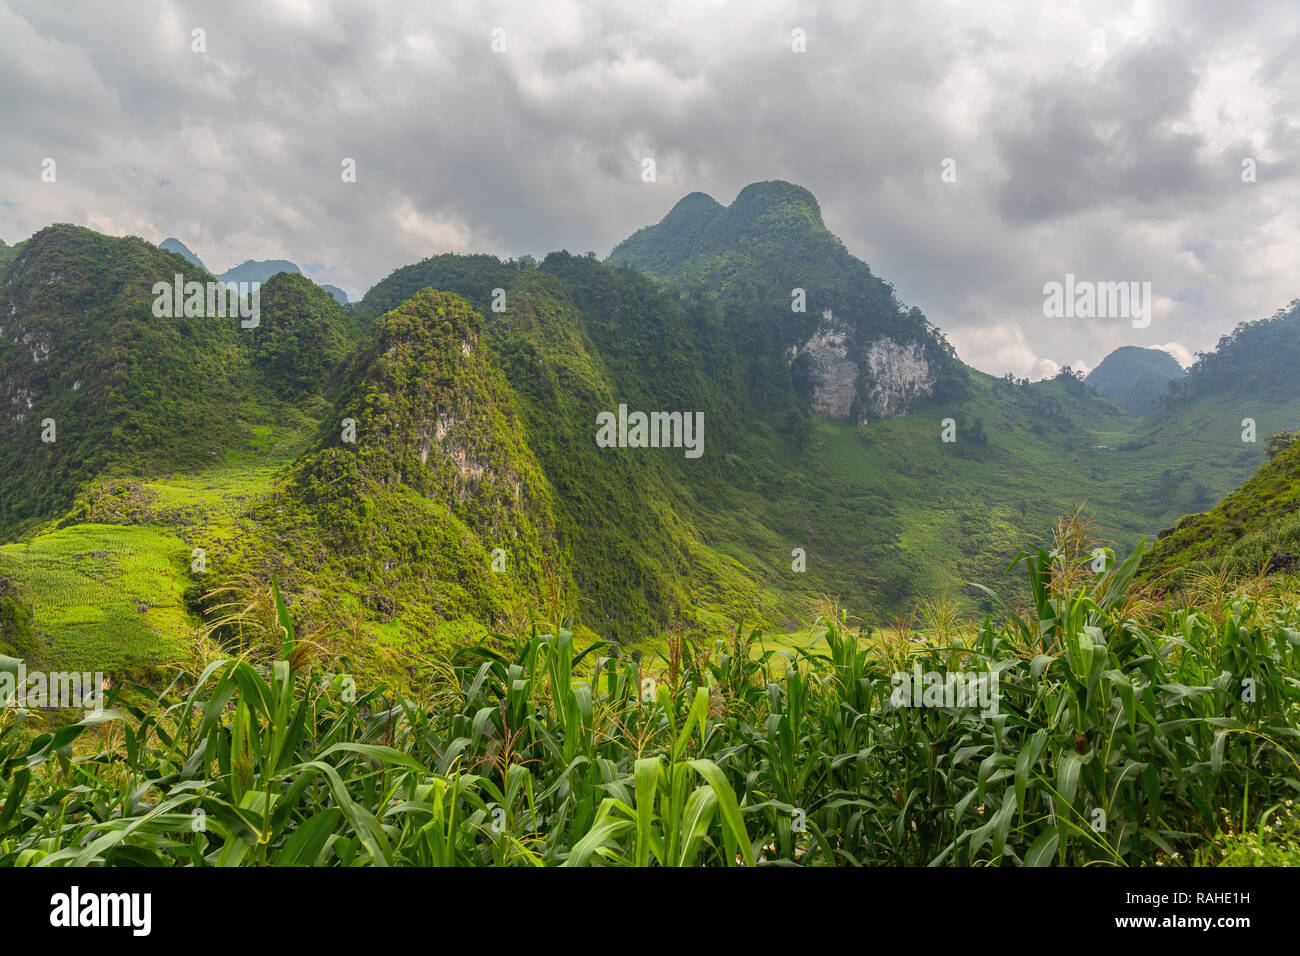 Vietnamese green mountains surrounded by fields of corn. Ha Giang Loop, Ha Giang Province, Vietnam, Asia Stock Photo